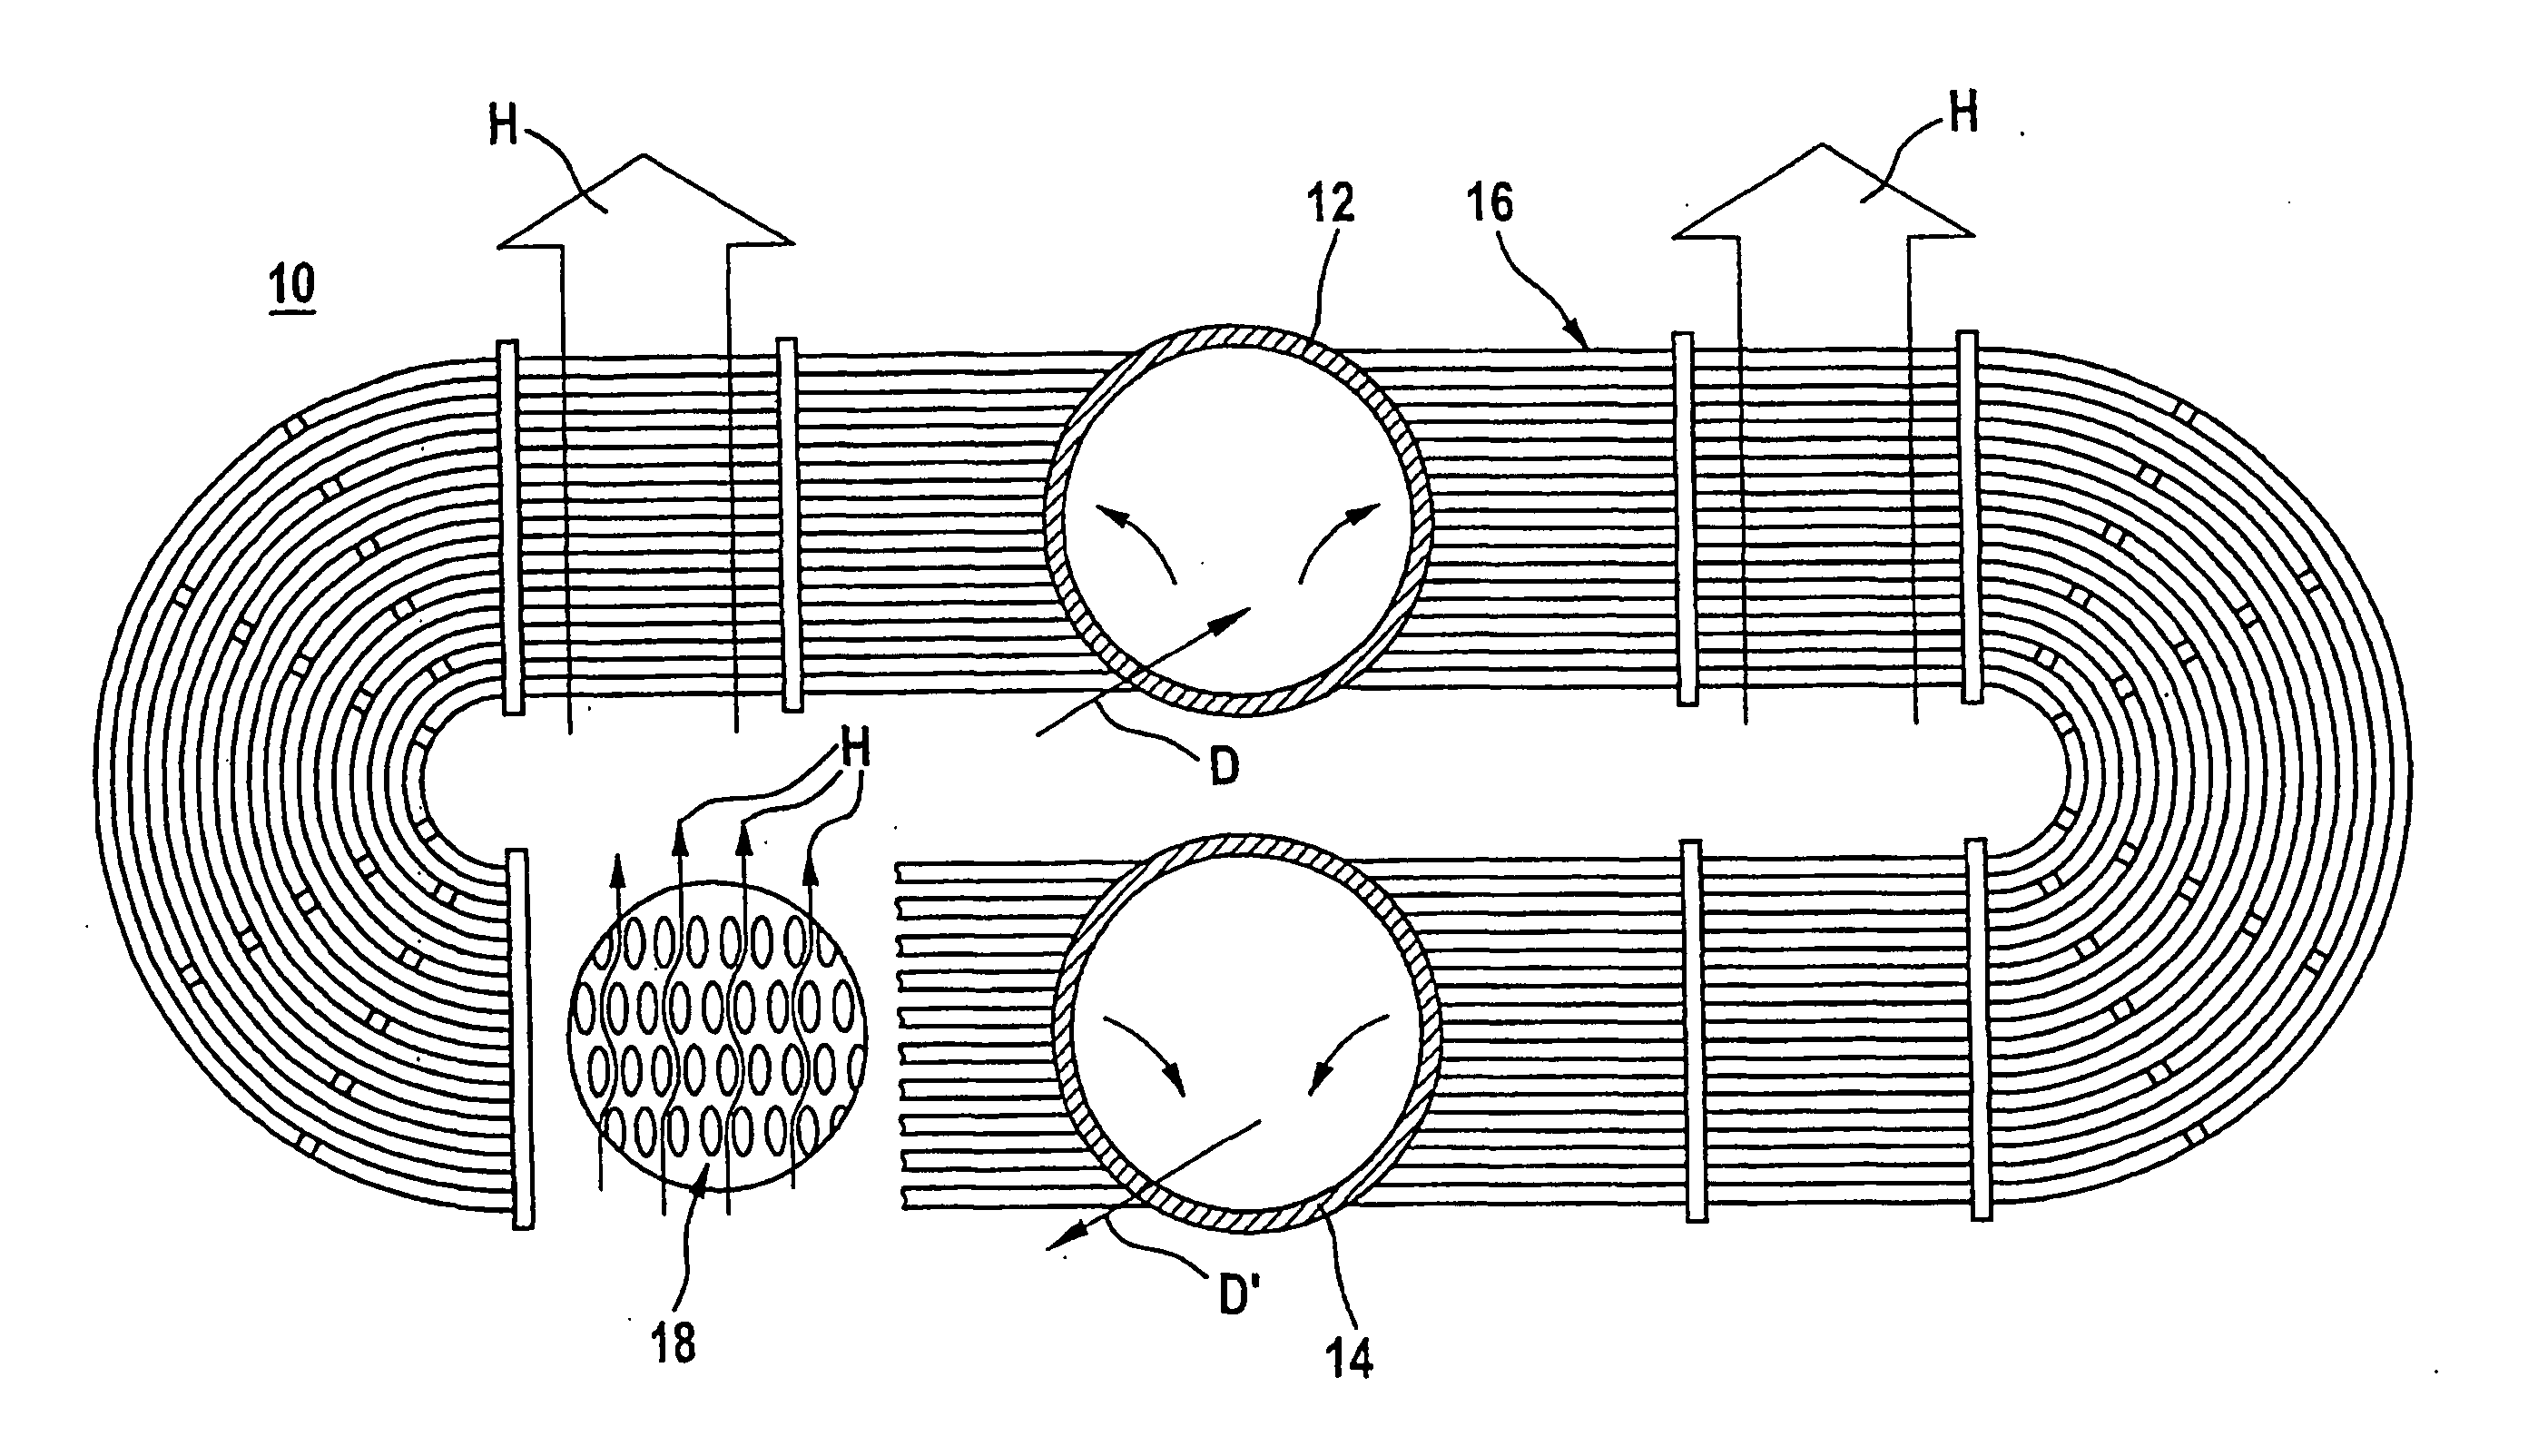 Method for producing heat exchanger tubes, which consist of half-tubes or complete tubes and which are provided for recuperative exhaust gas heat exchanger